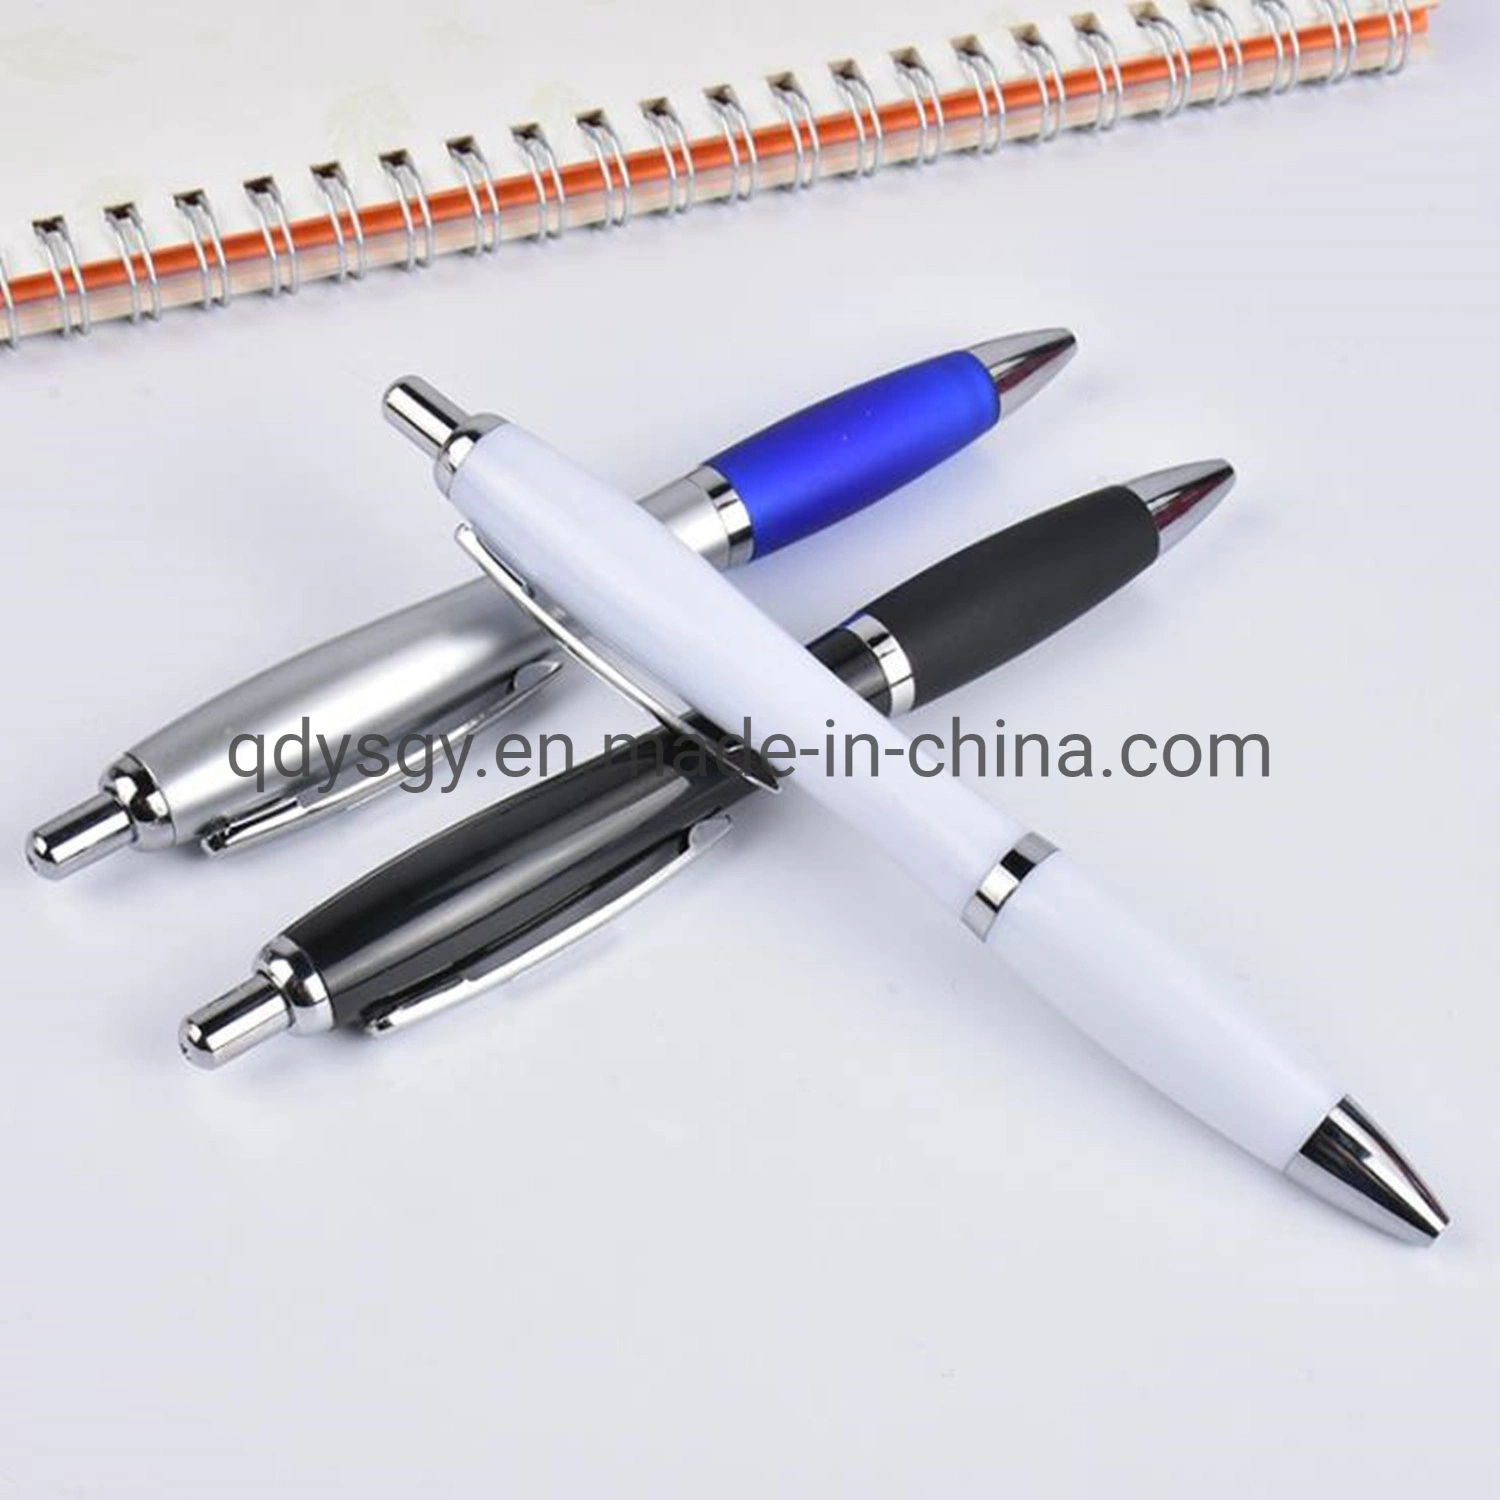 Promotional Stationery Office Supply Gourd Ball Pen